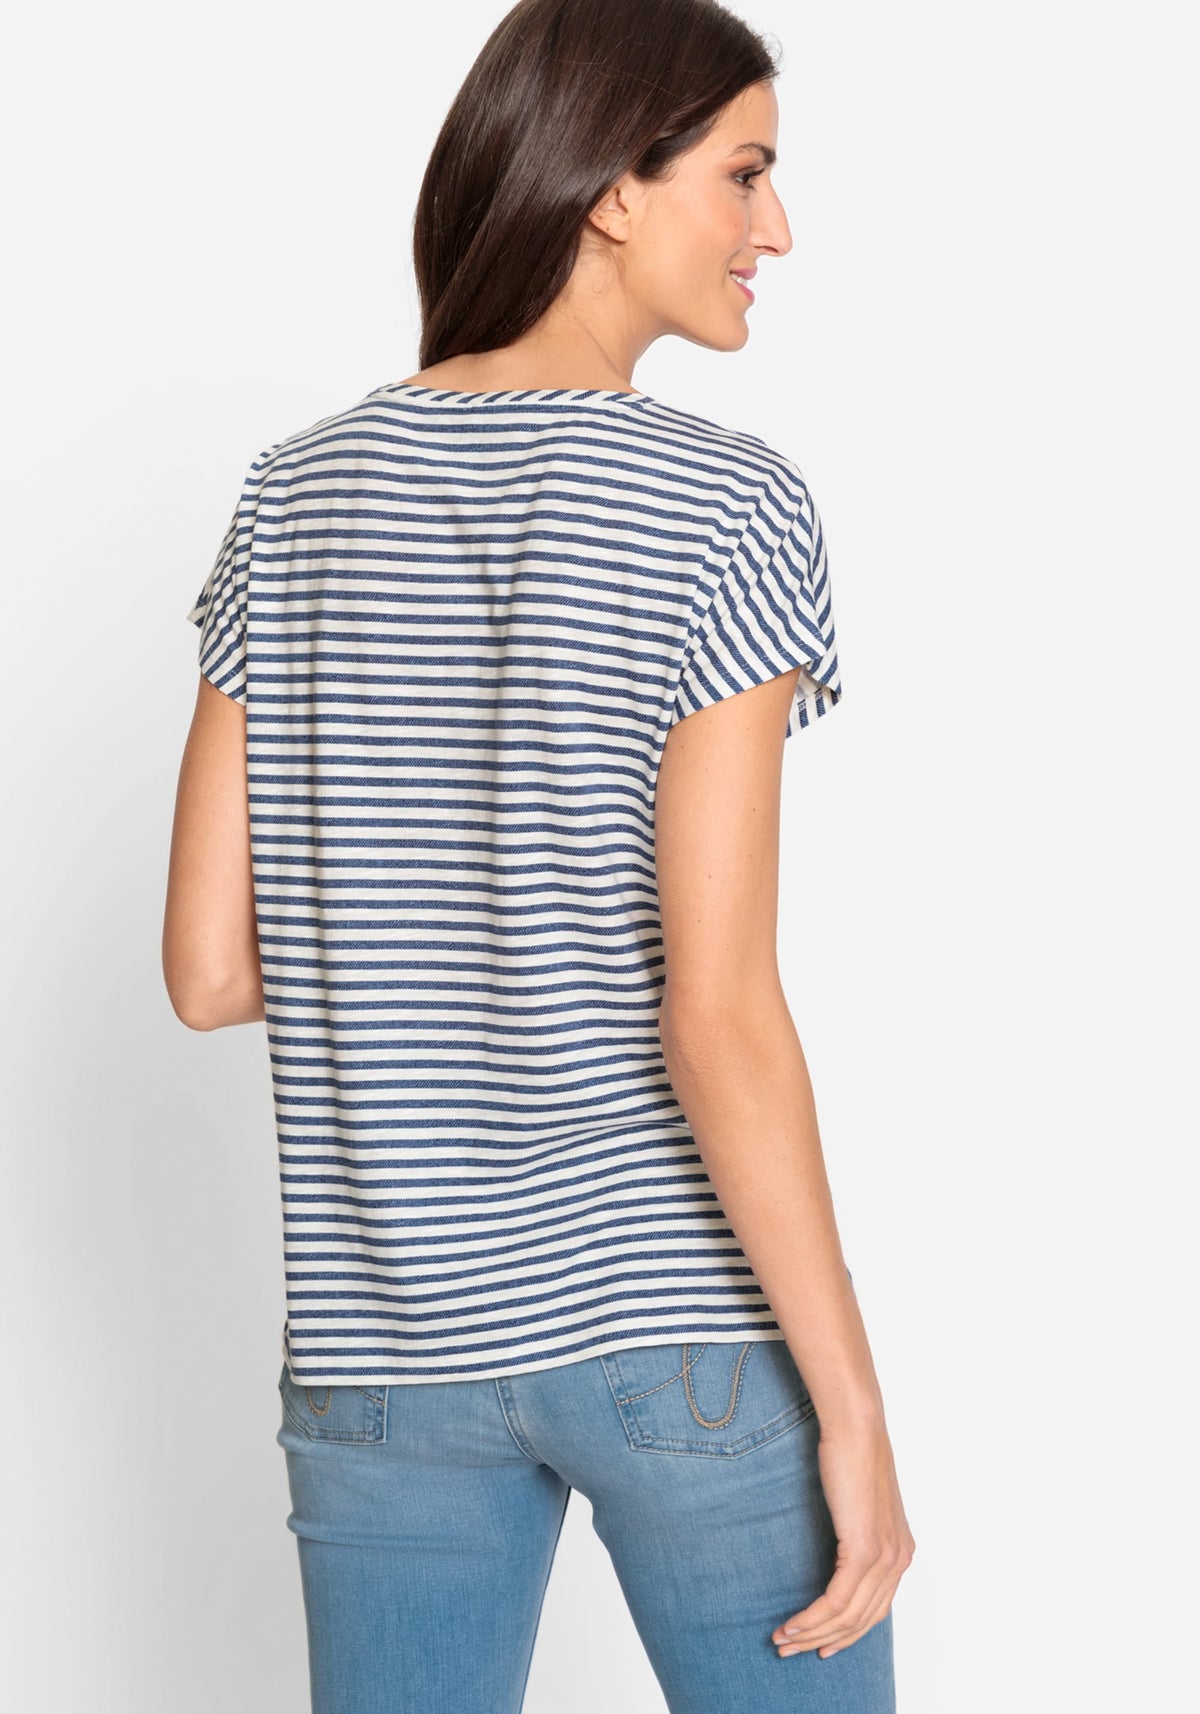 100% Cotton Stripe and Floral T-Shirt